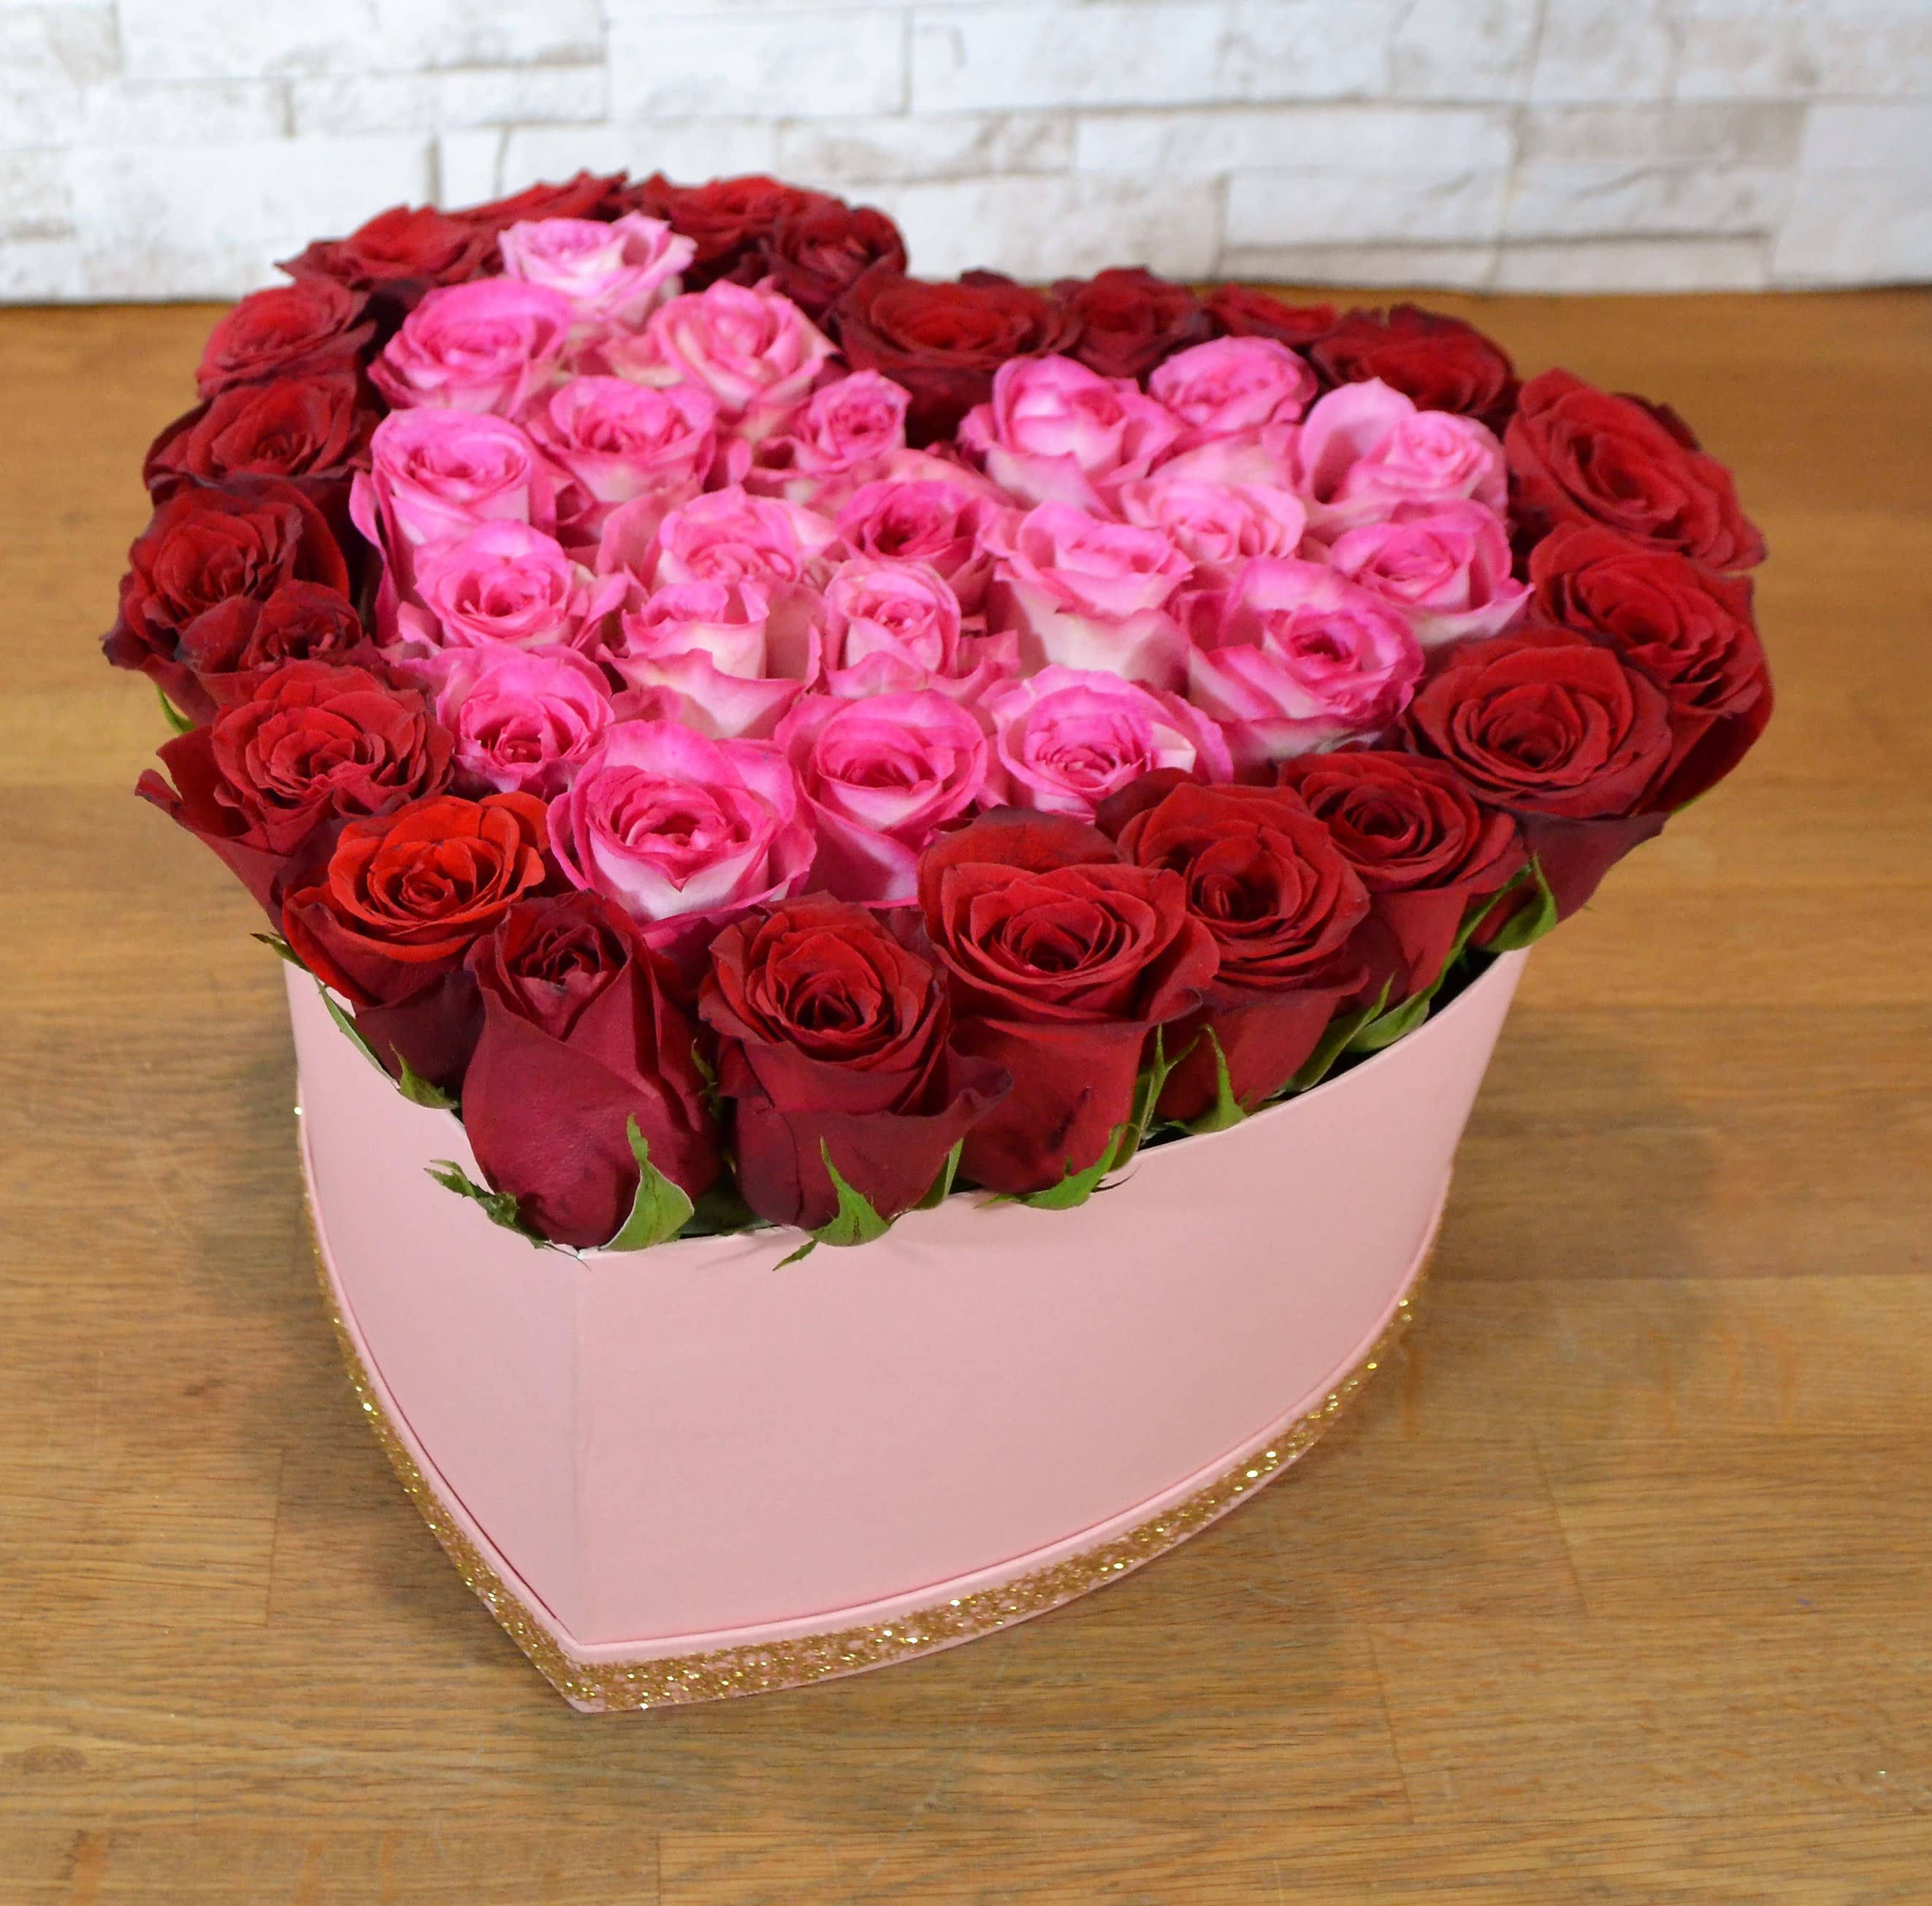 Love with Red & Pink Roses - Arabian Petals (4569382125613)